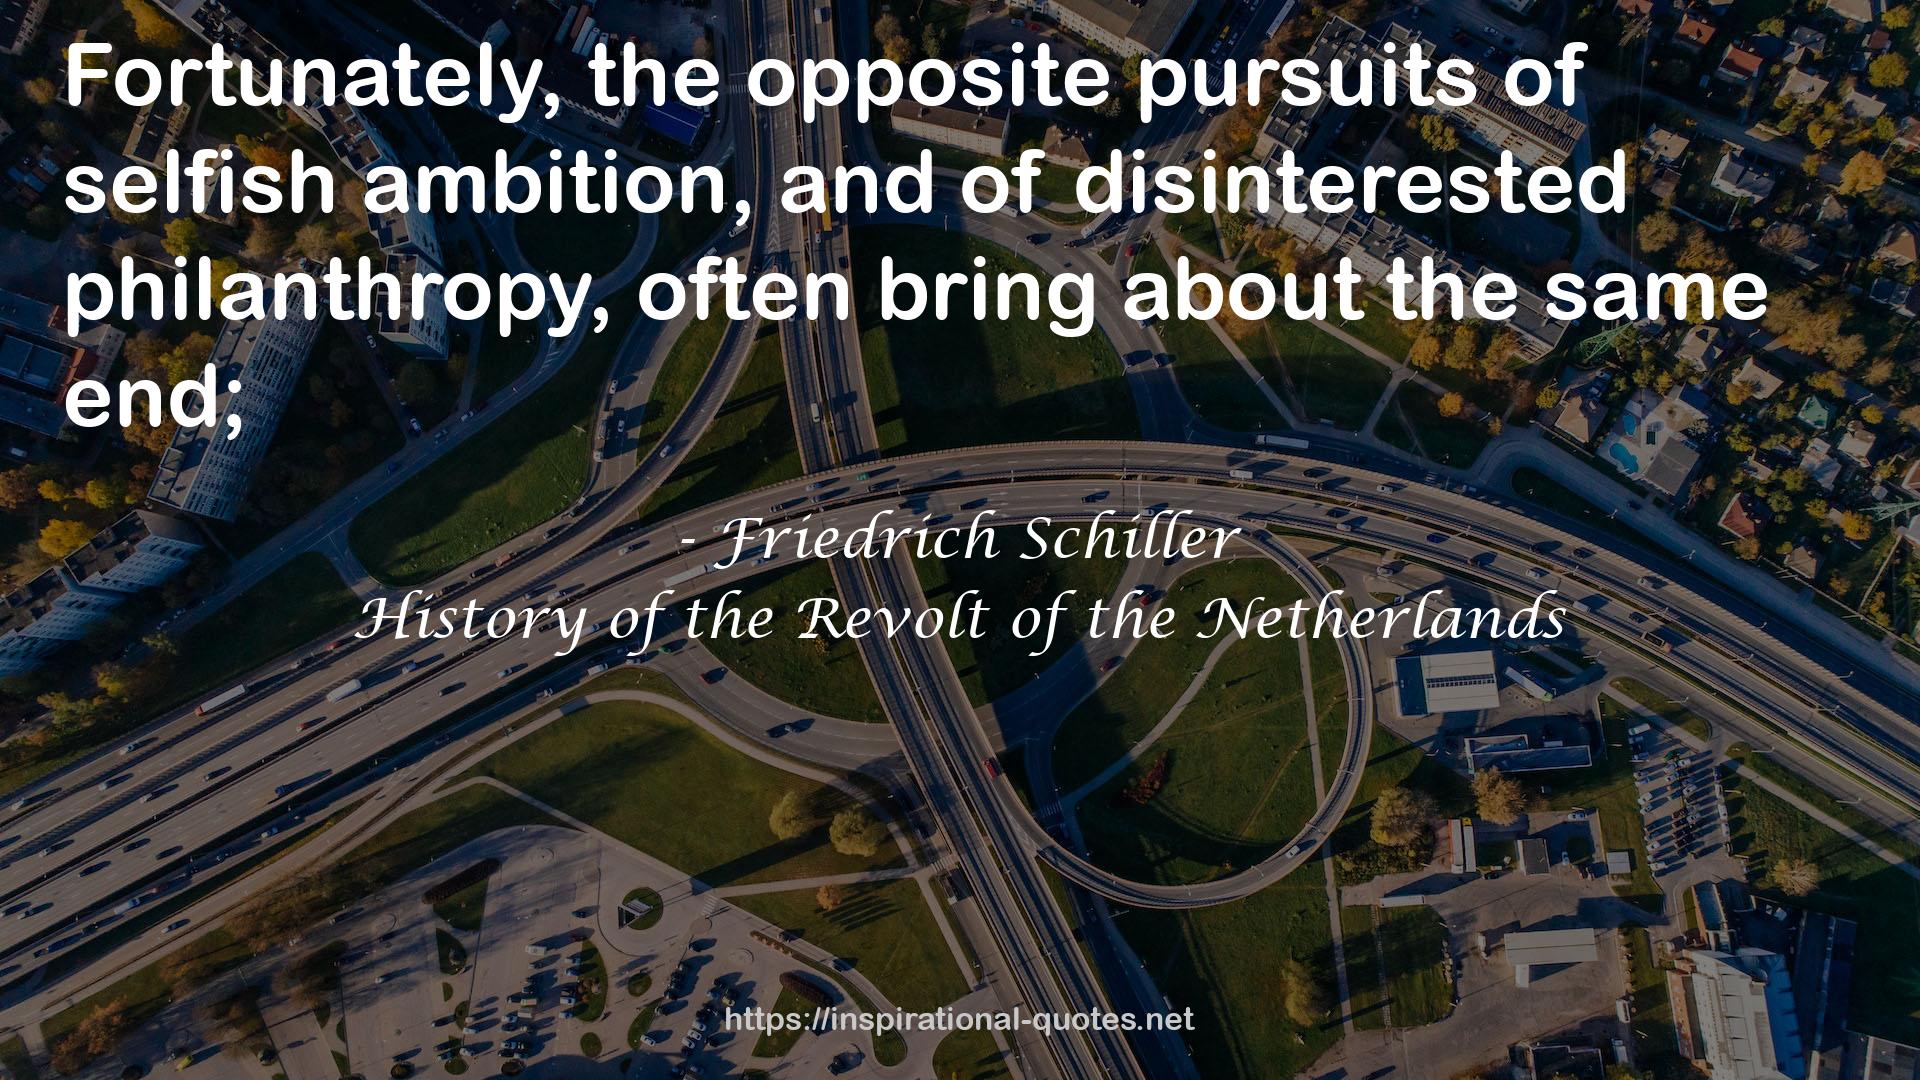 History of the Revolt of the Netherlands QUOTES